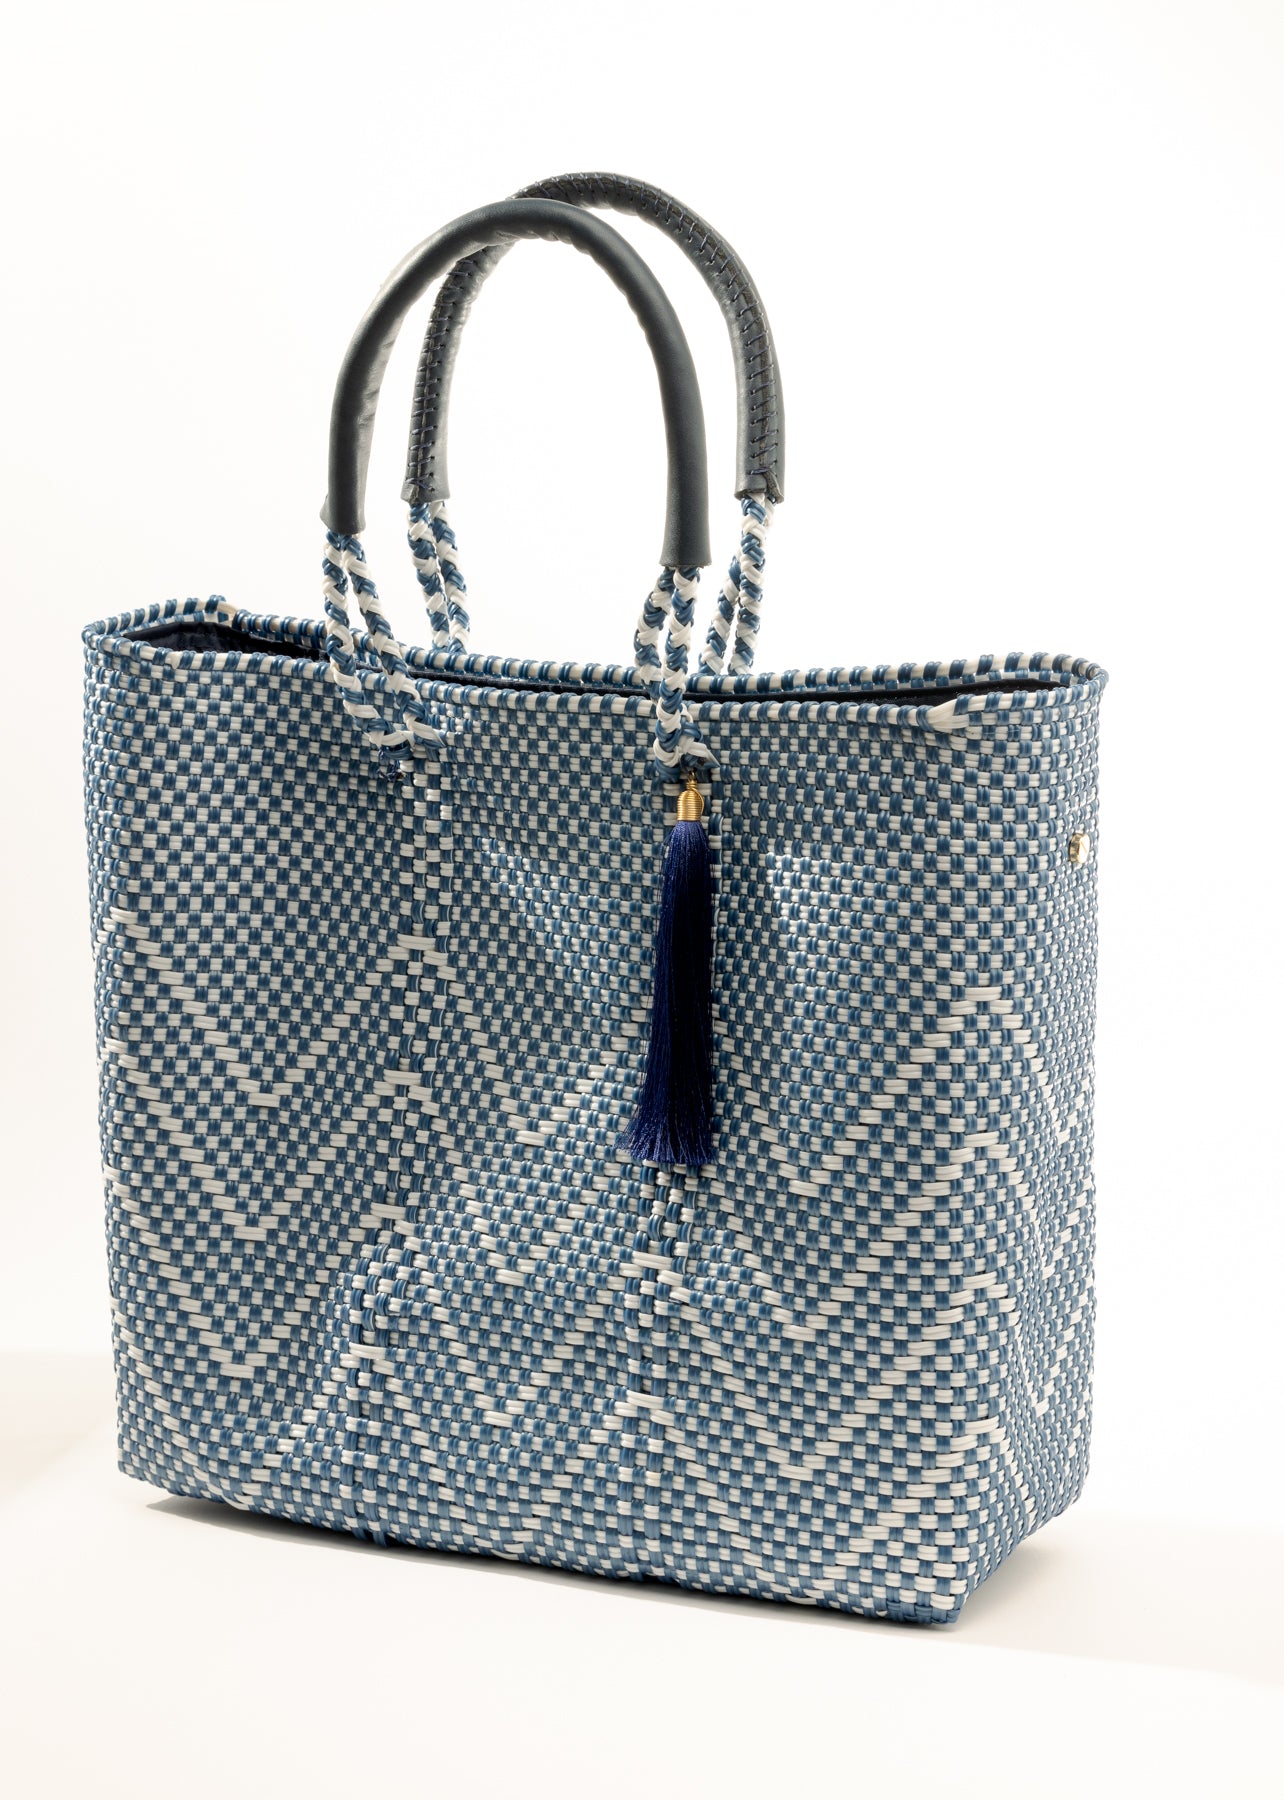 handbags made from recycled plastic bags